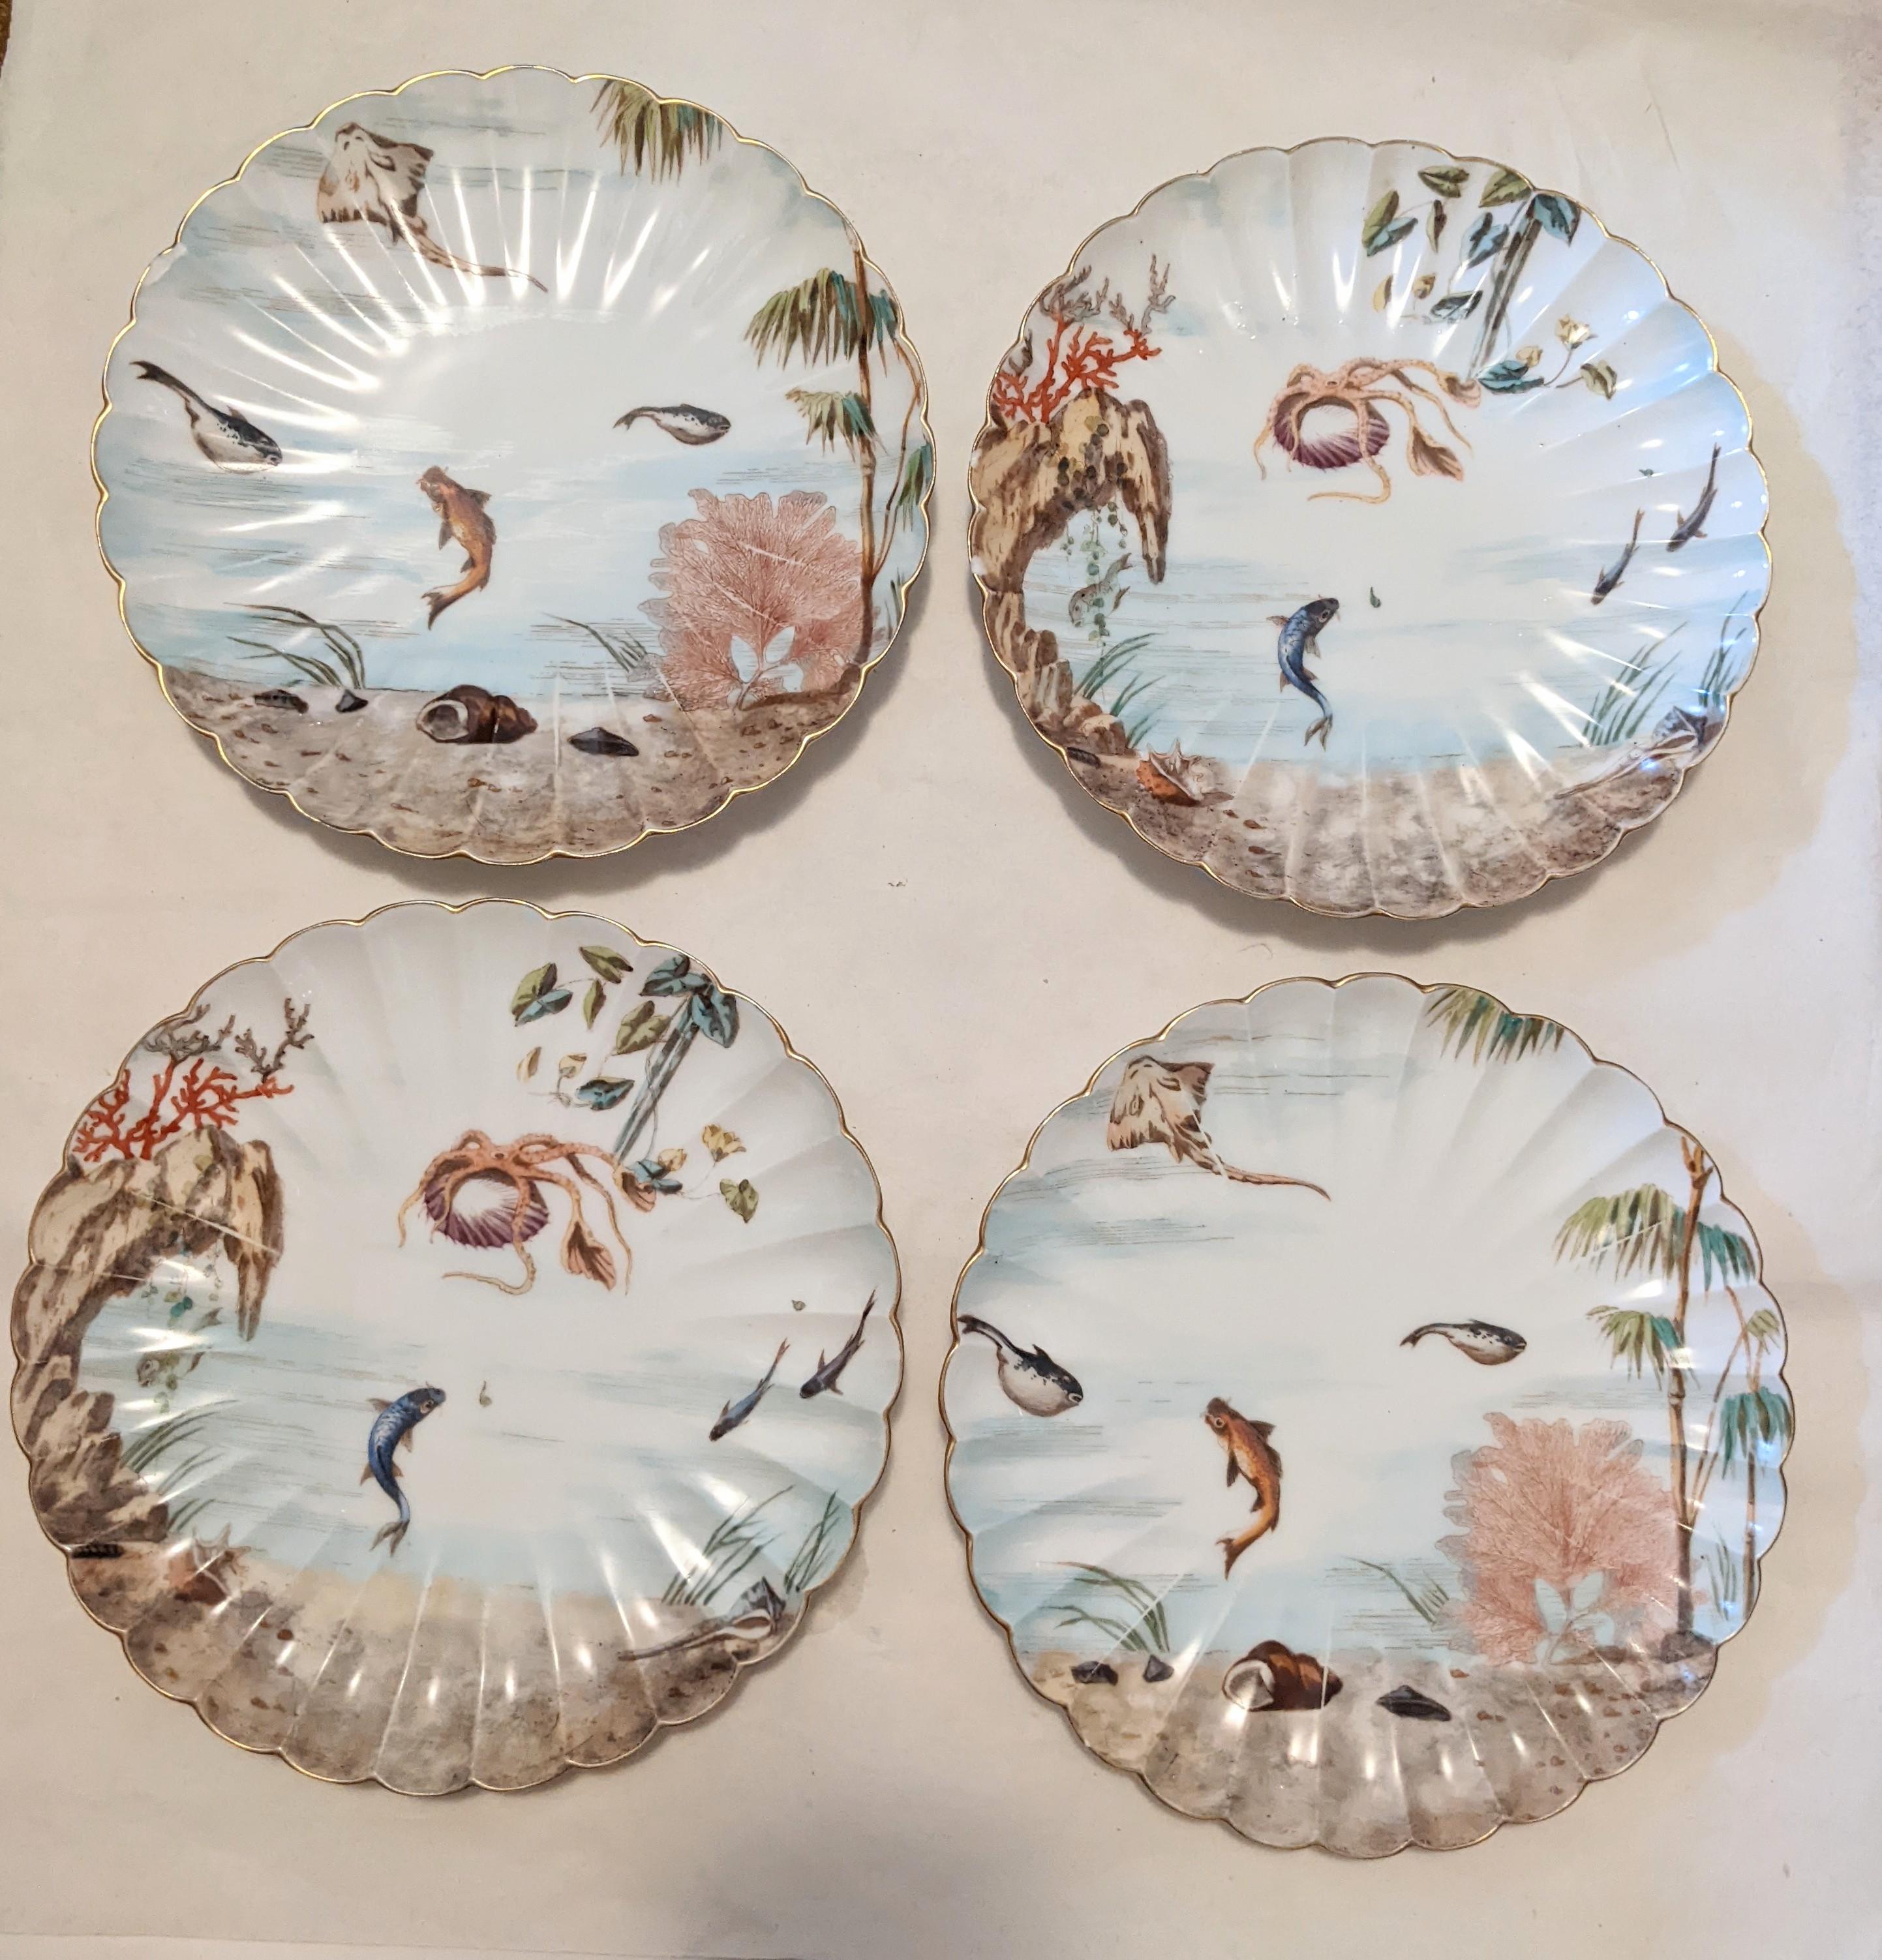 Attractive set of fish plates retailed by Ovington from the 1930's, for use only as display as several have chipped edges. 4 out of 6 have chipping but not severe, great for display purposes. Very charming depictions of marine life. 
8.5